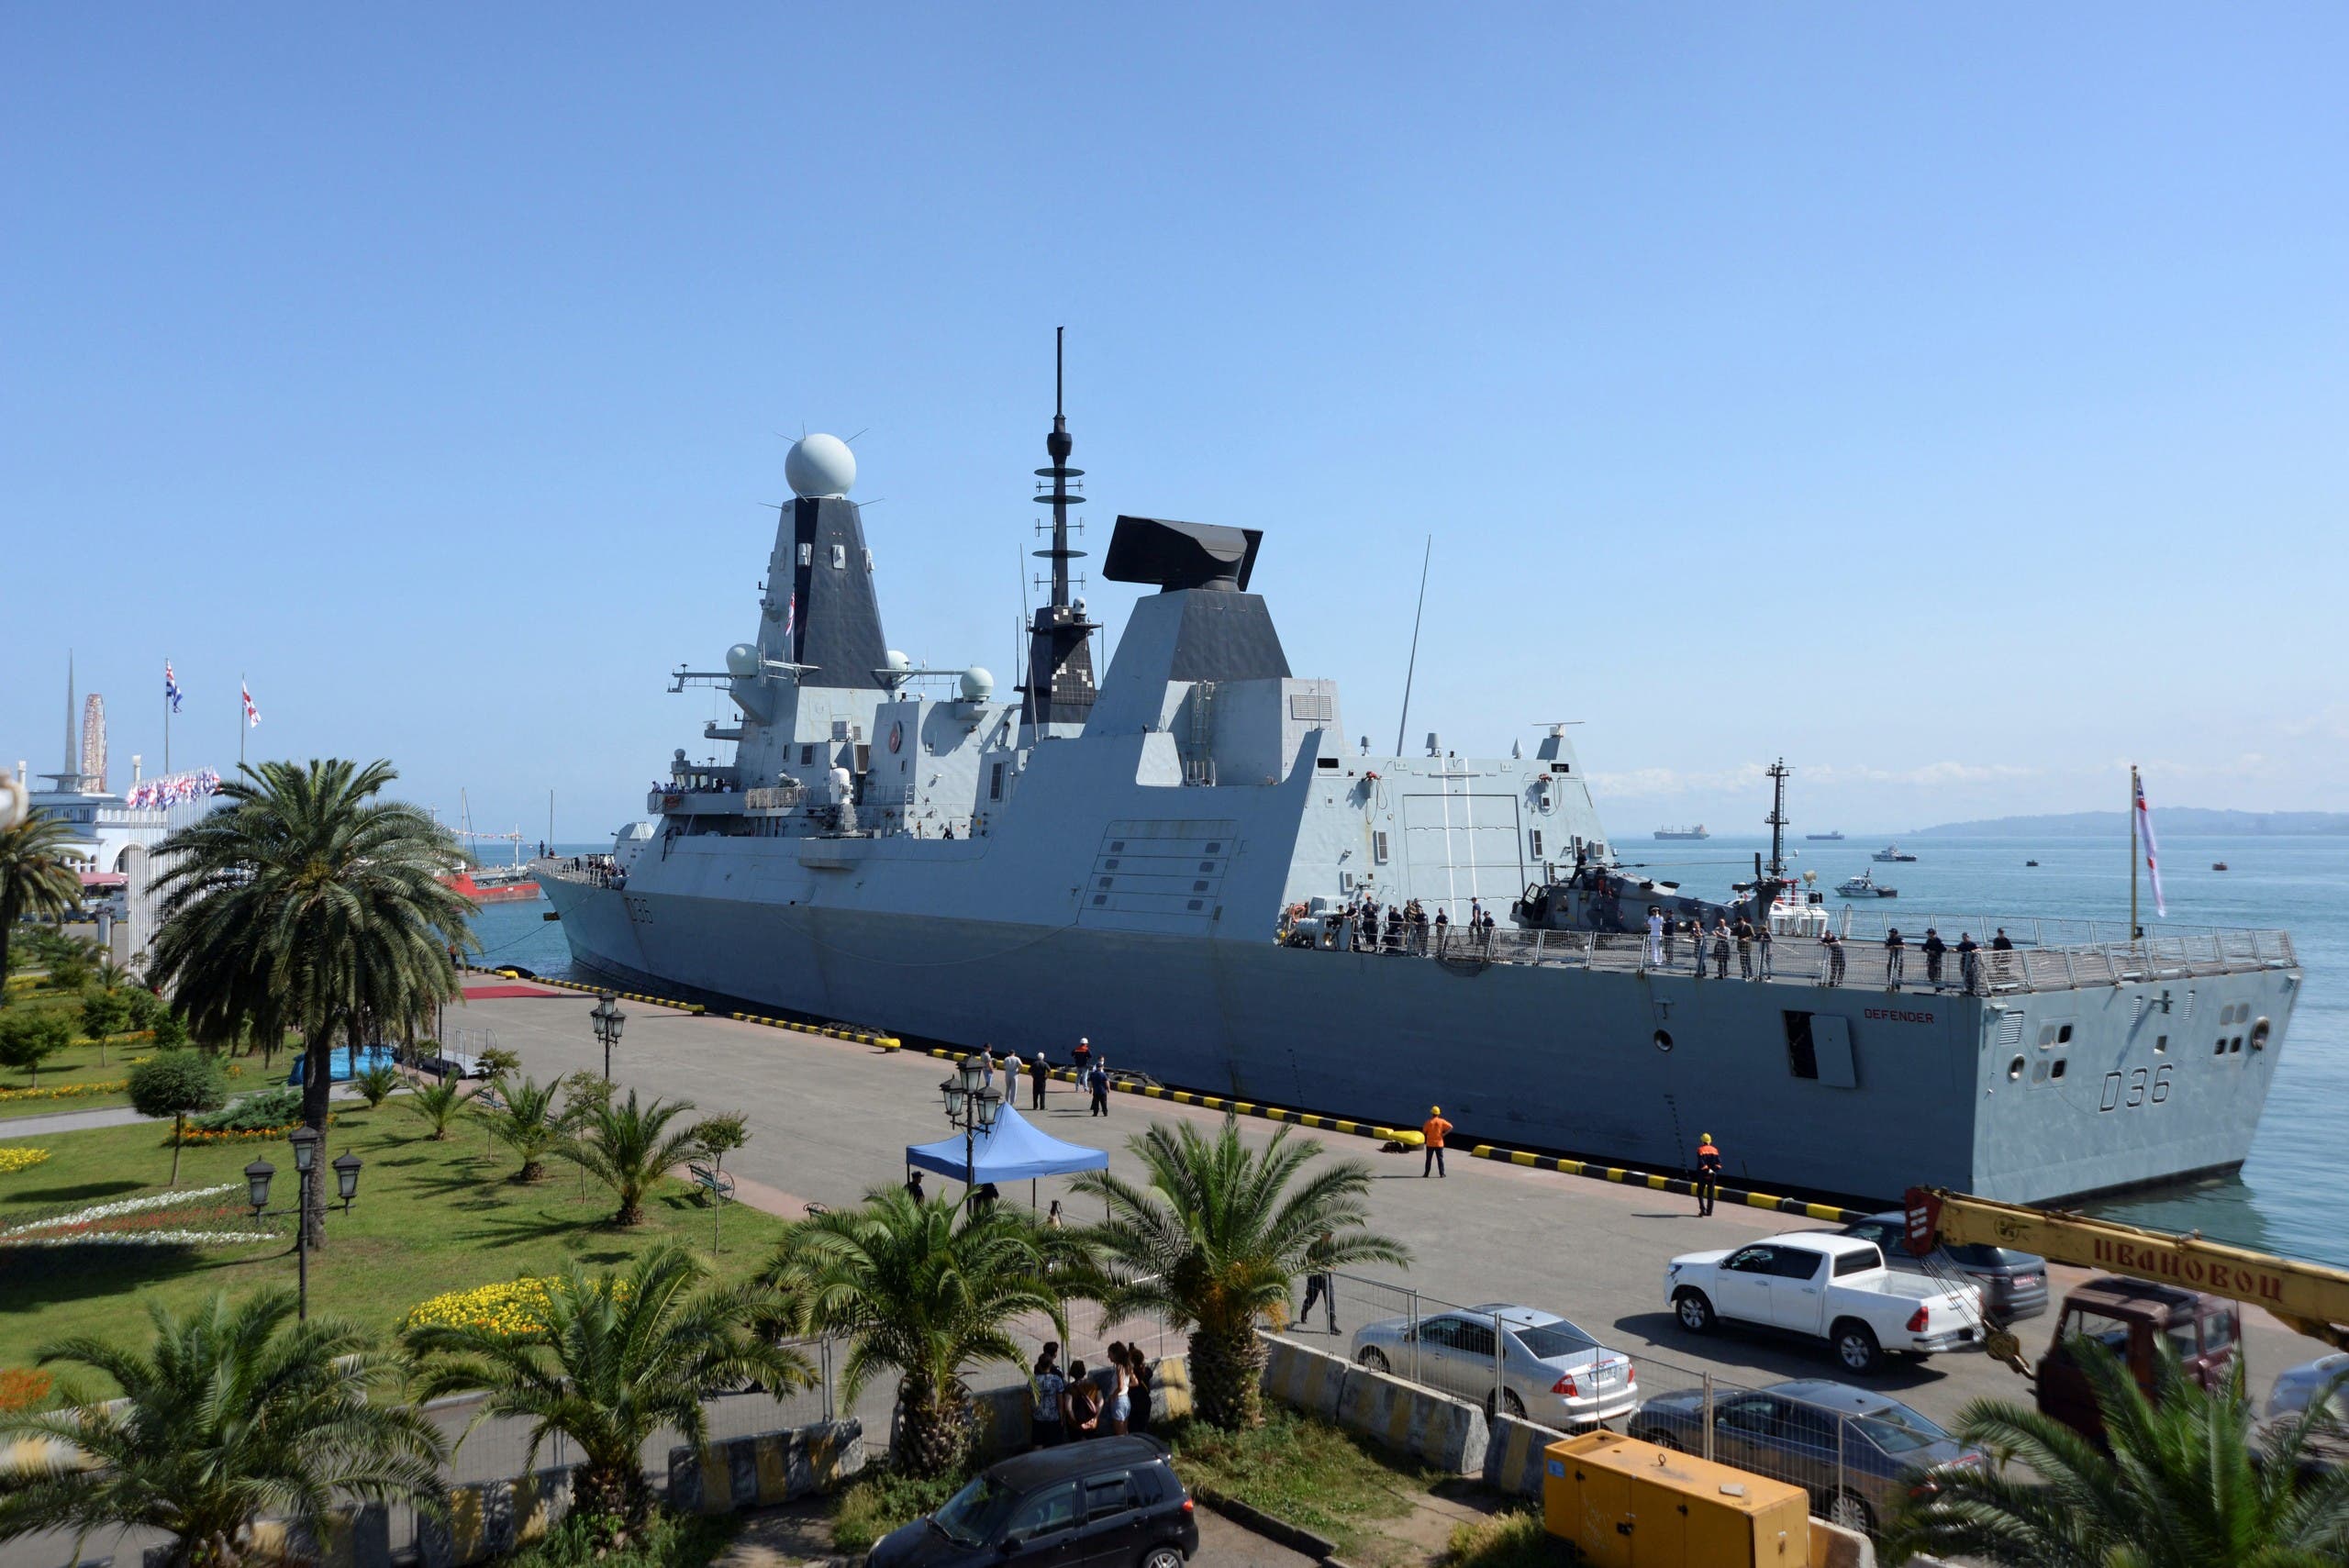 The British Royal Navy destroyer HMS Defender arrives in the Black Sea port of Batumi on June 26, 2021. HMS Defender, makes a port call in Batumi for joint exercises with the NATO-aspirant country’s coast guard, according to the Royal Navy, days after Russia claimed it had fired warning shots at the warship in the coastal waters of Crimea. (AFP)